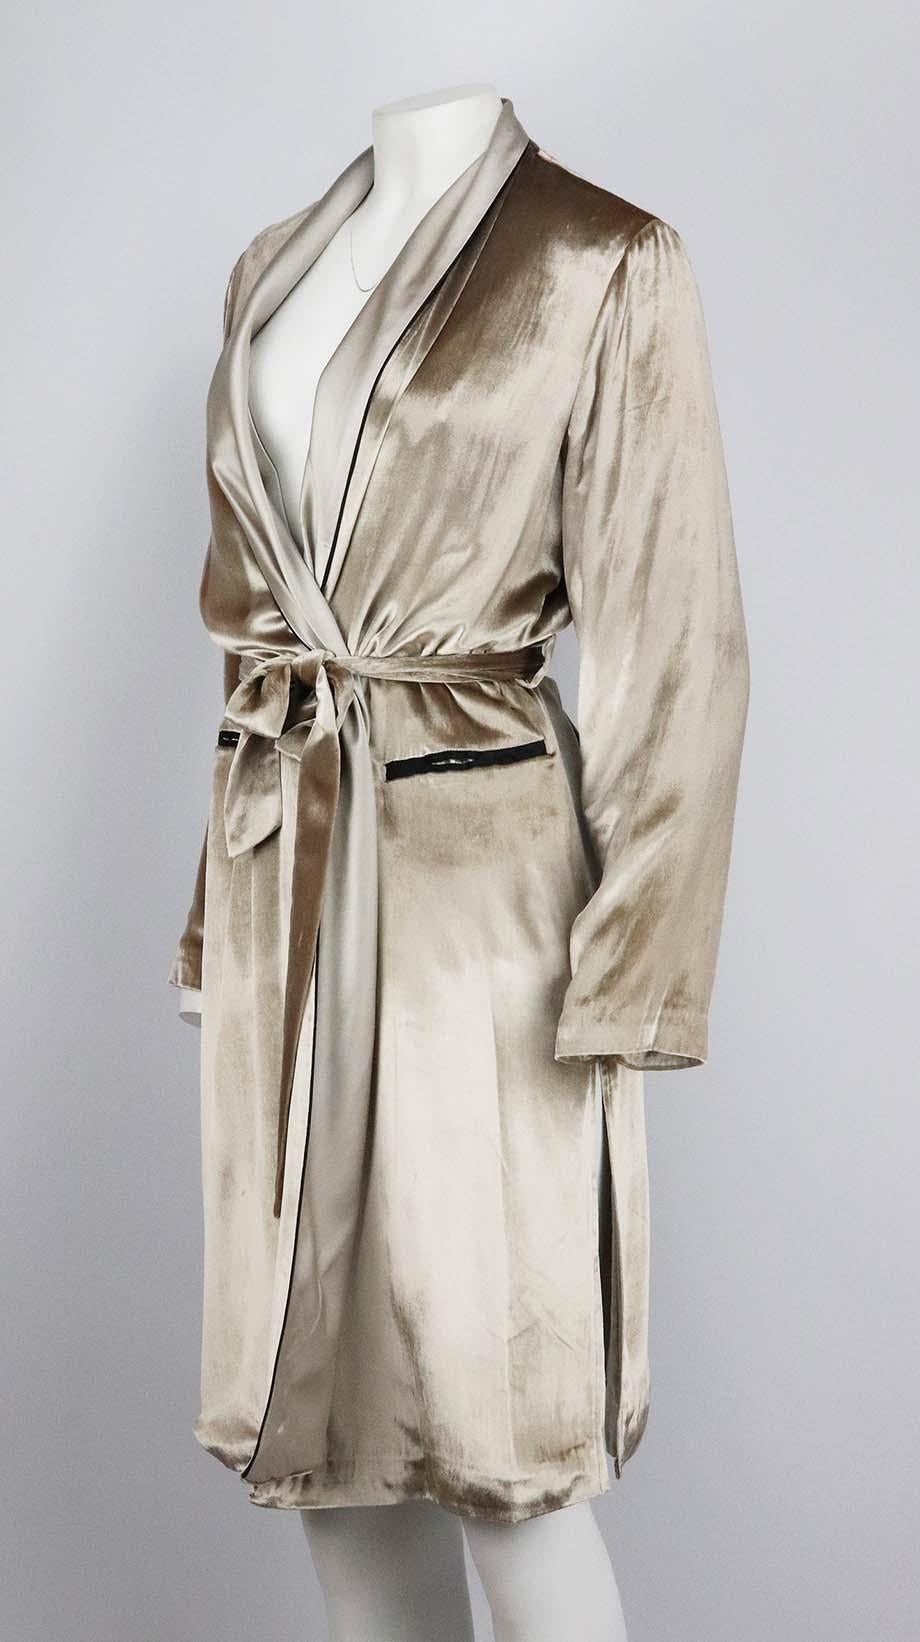 This robe by Fleur du Mal is cut from plush velvet with a matching tie belt, it has a silk-charmeuse shawl collar and contrasting black piped trims. Mushroom velvet, stone and black silk-charmeuse. Belt fastening at front. 82% Viscose, 18% silk;